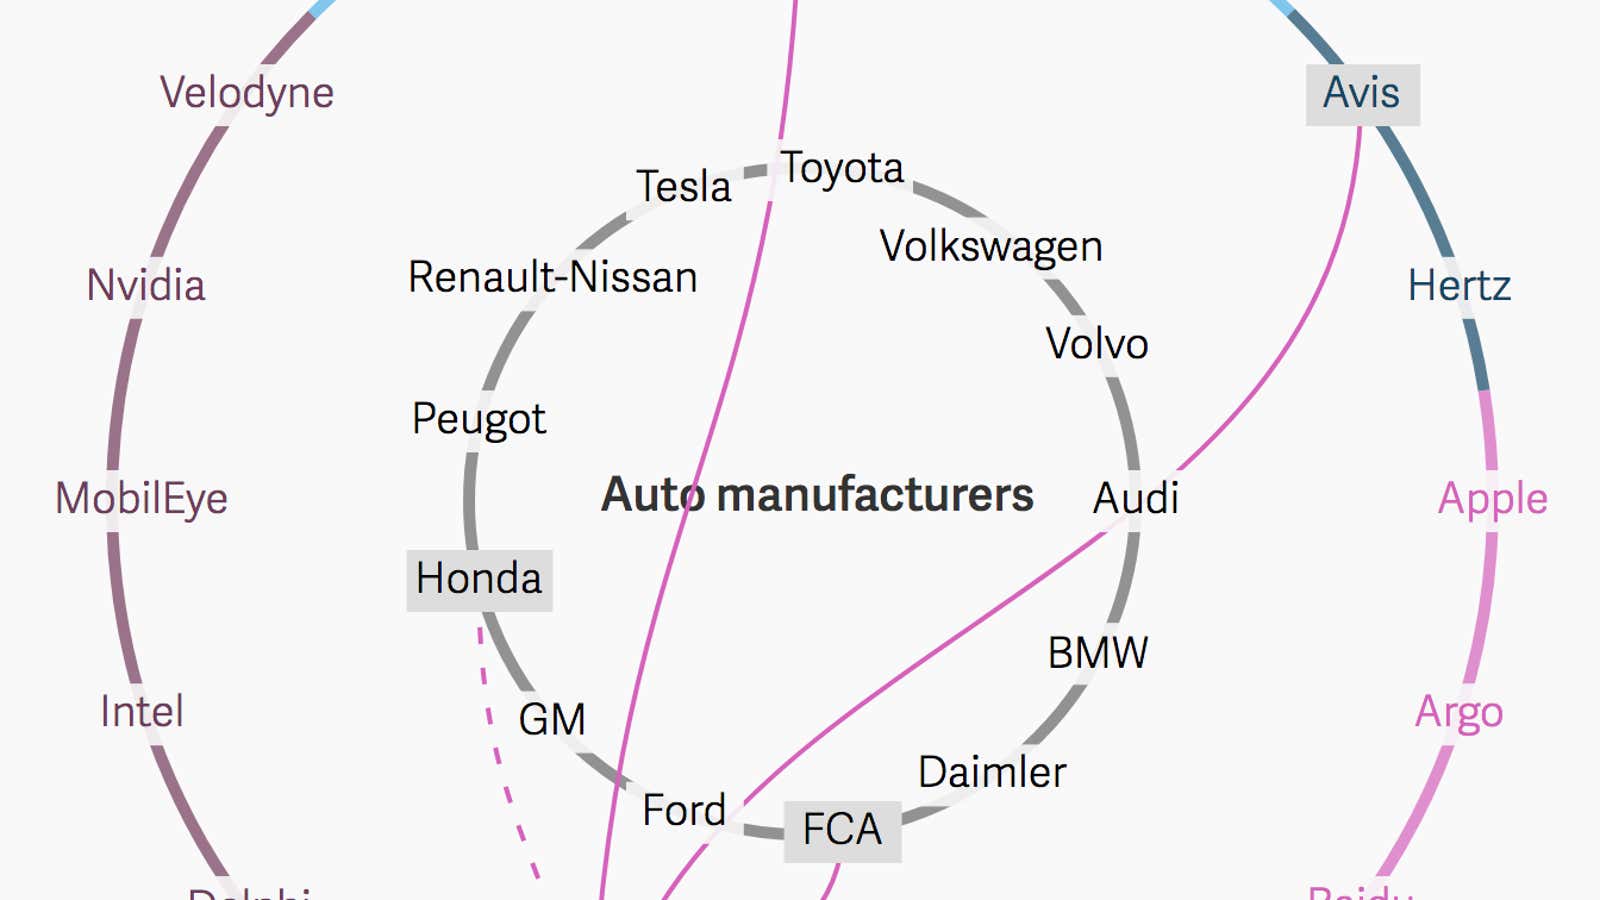 The entangling alliances of the self-driving car world, visualized